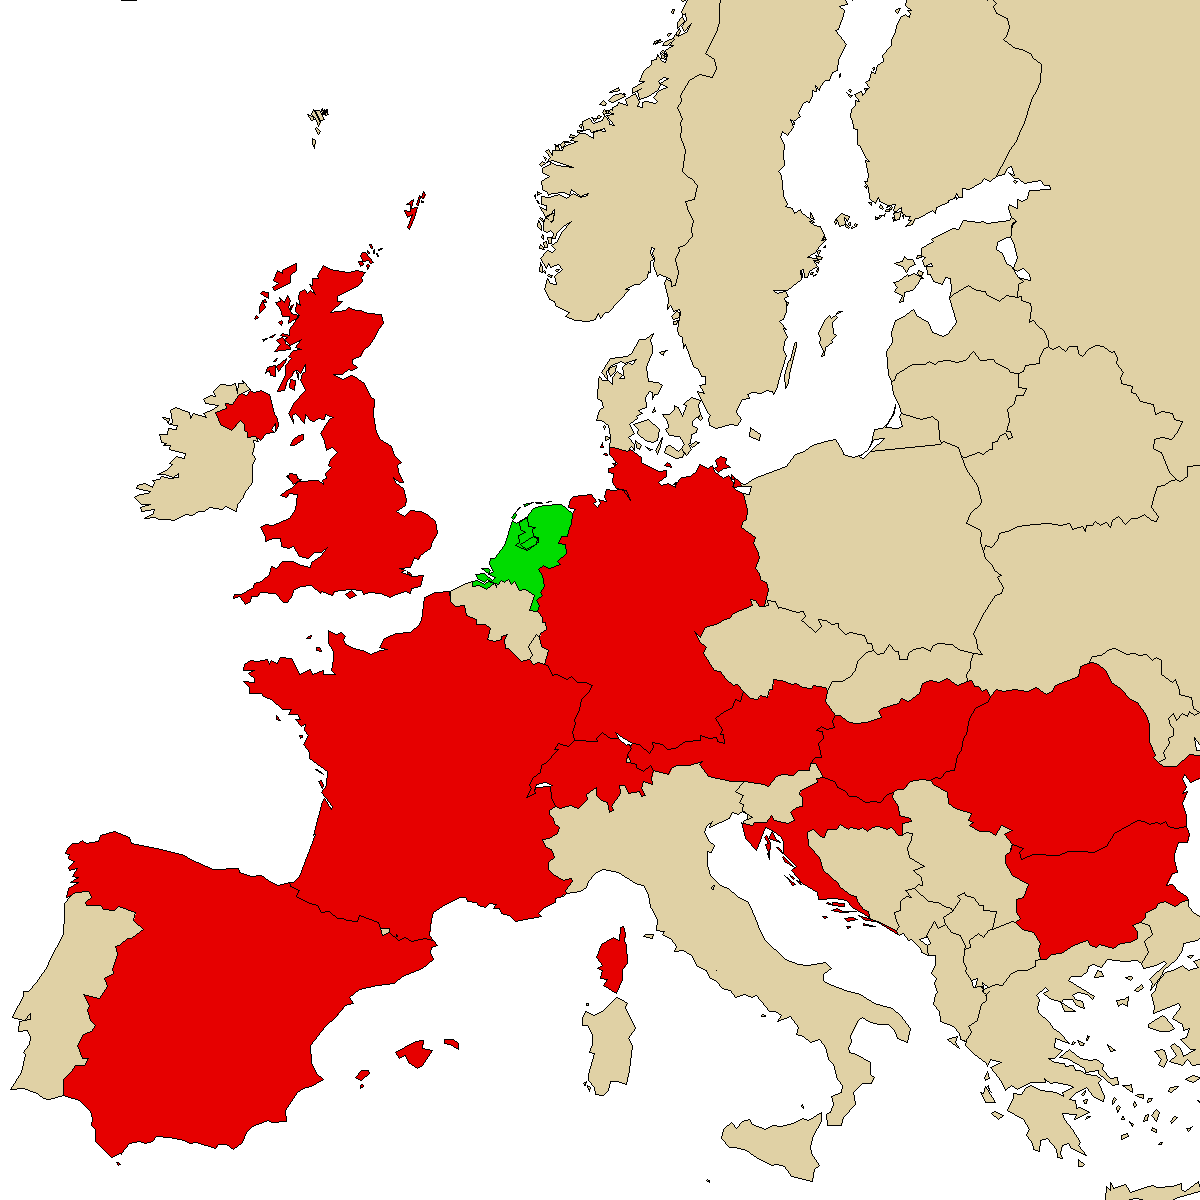 legal info map for our product MDPHP, green are countries where we found no ban, red with ban, grey is unknown